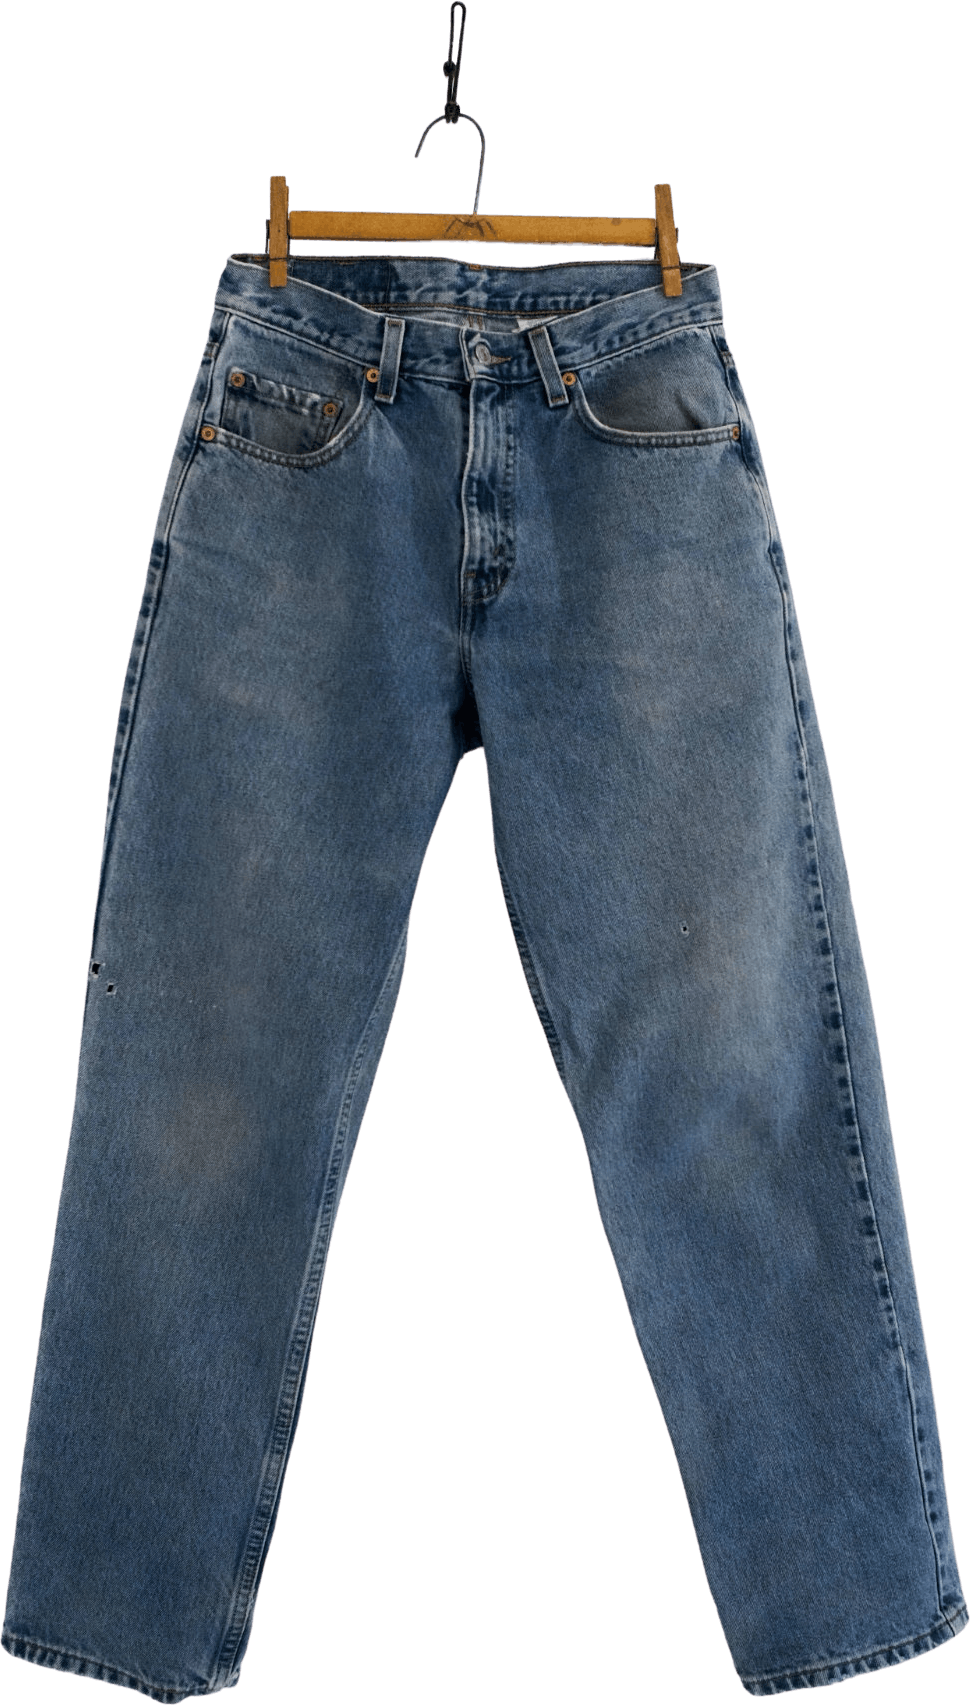 Vintage 90’s Blue Relaxed Fit Jeans by Levi's | Shop THRILLING